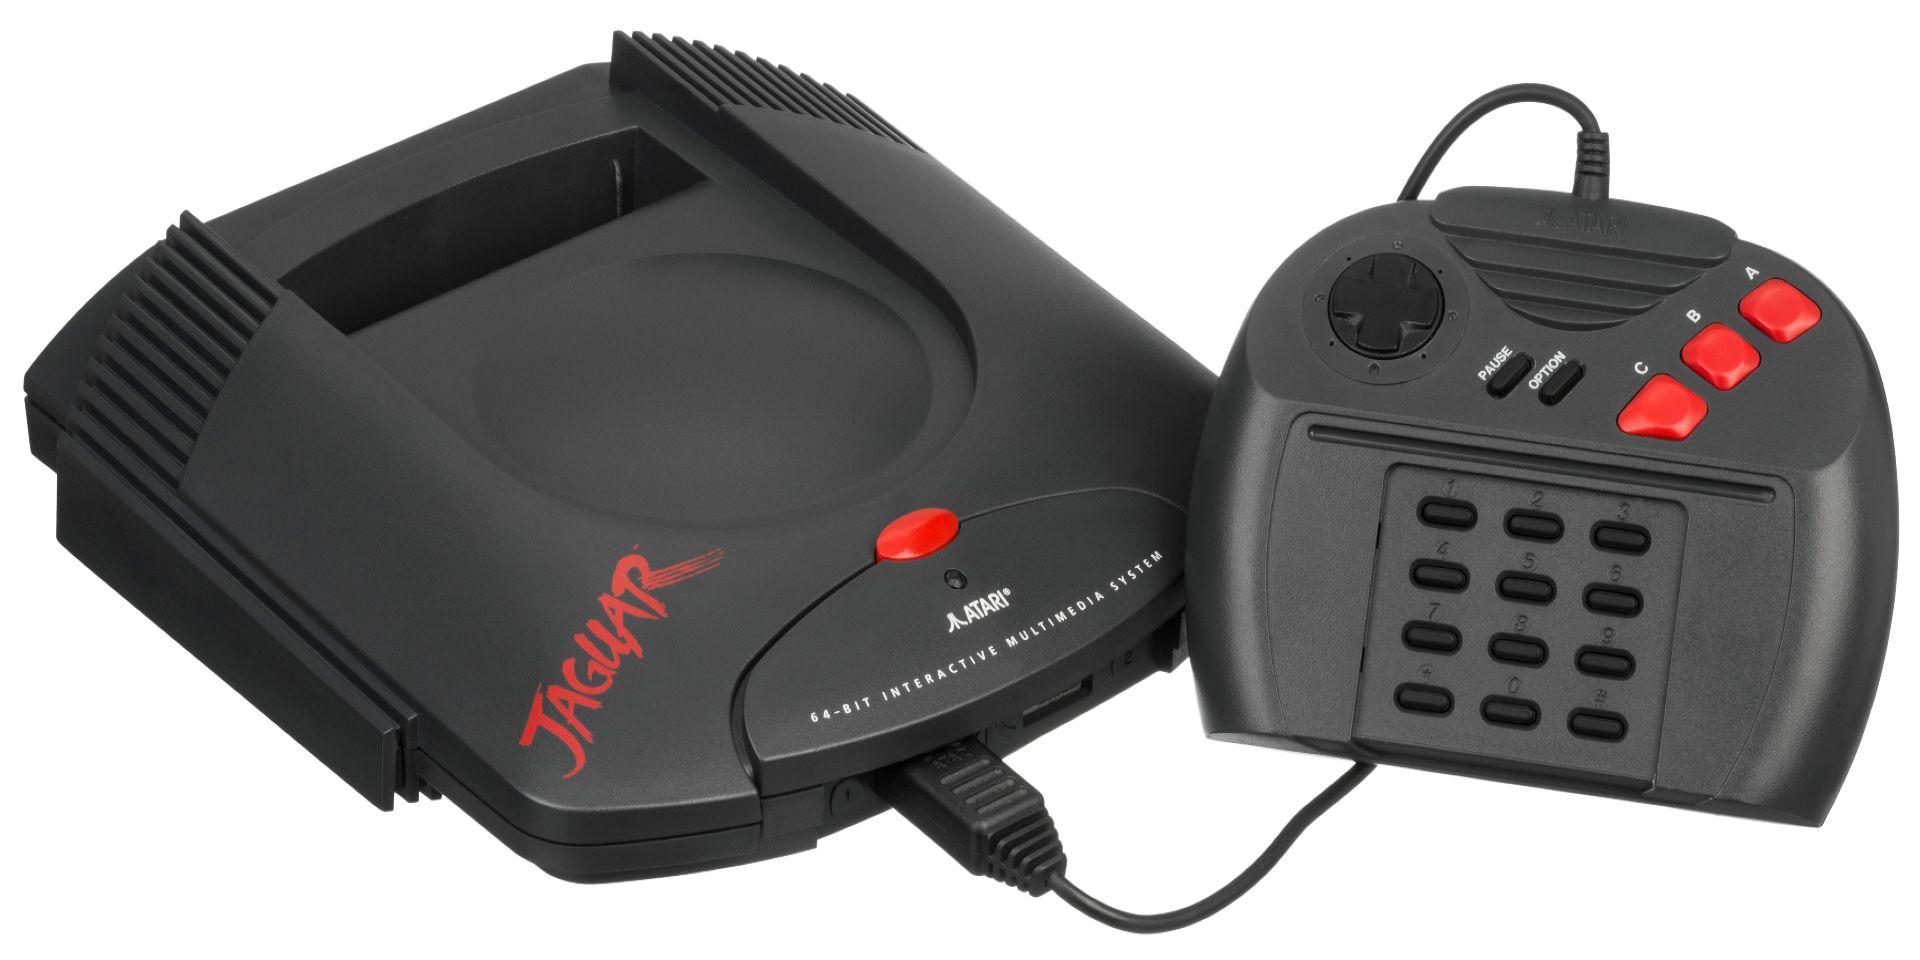 An image of the Atari Jaguar system with one controller.